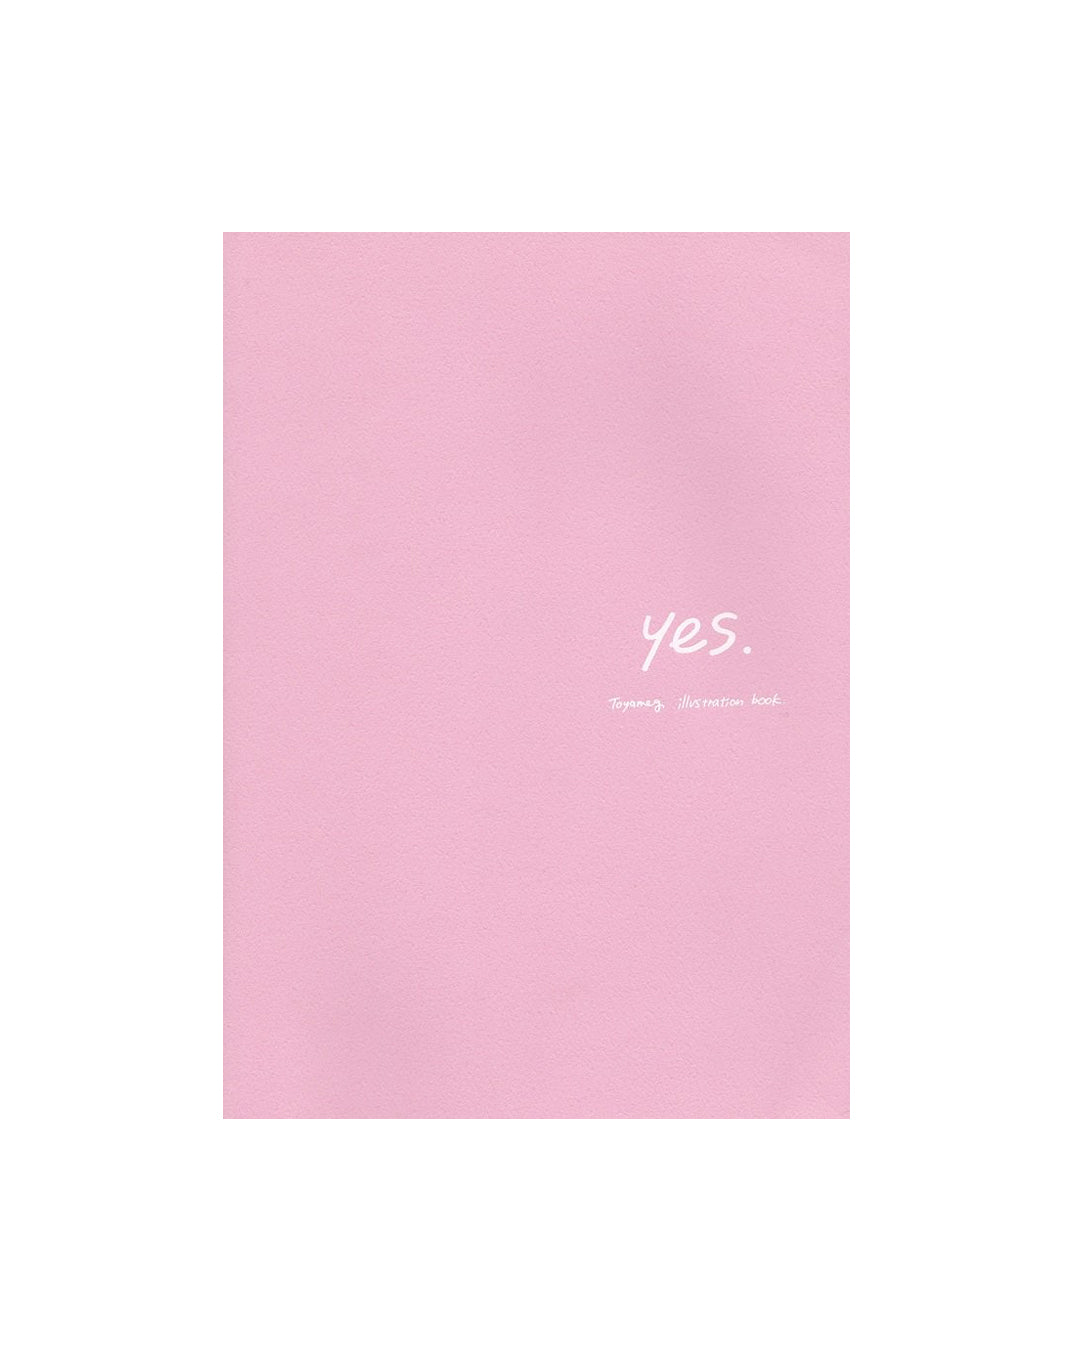 yes / Toyameg illustration book with MIX TAPE (アートブック)